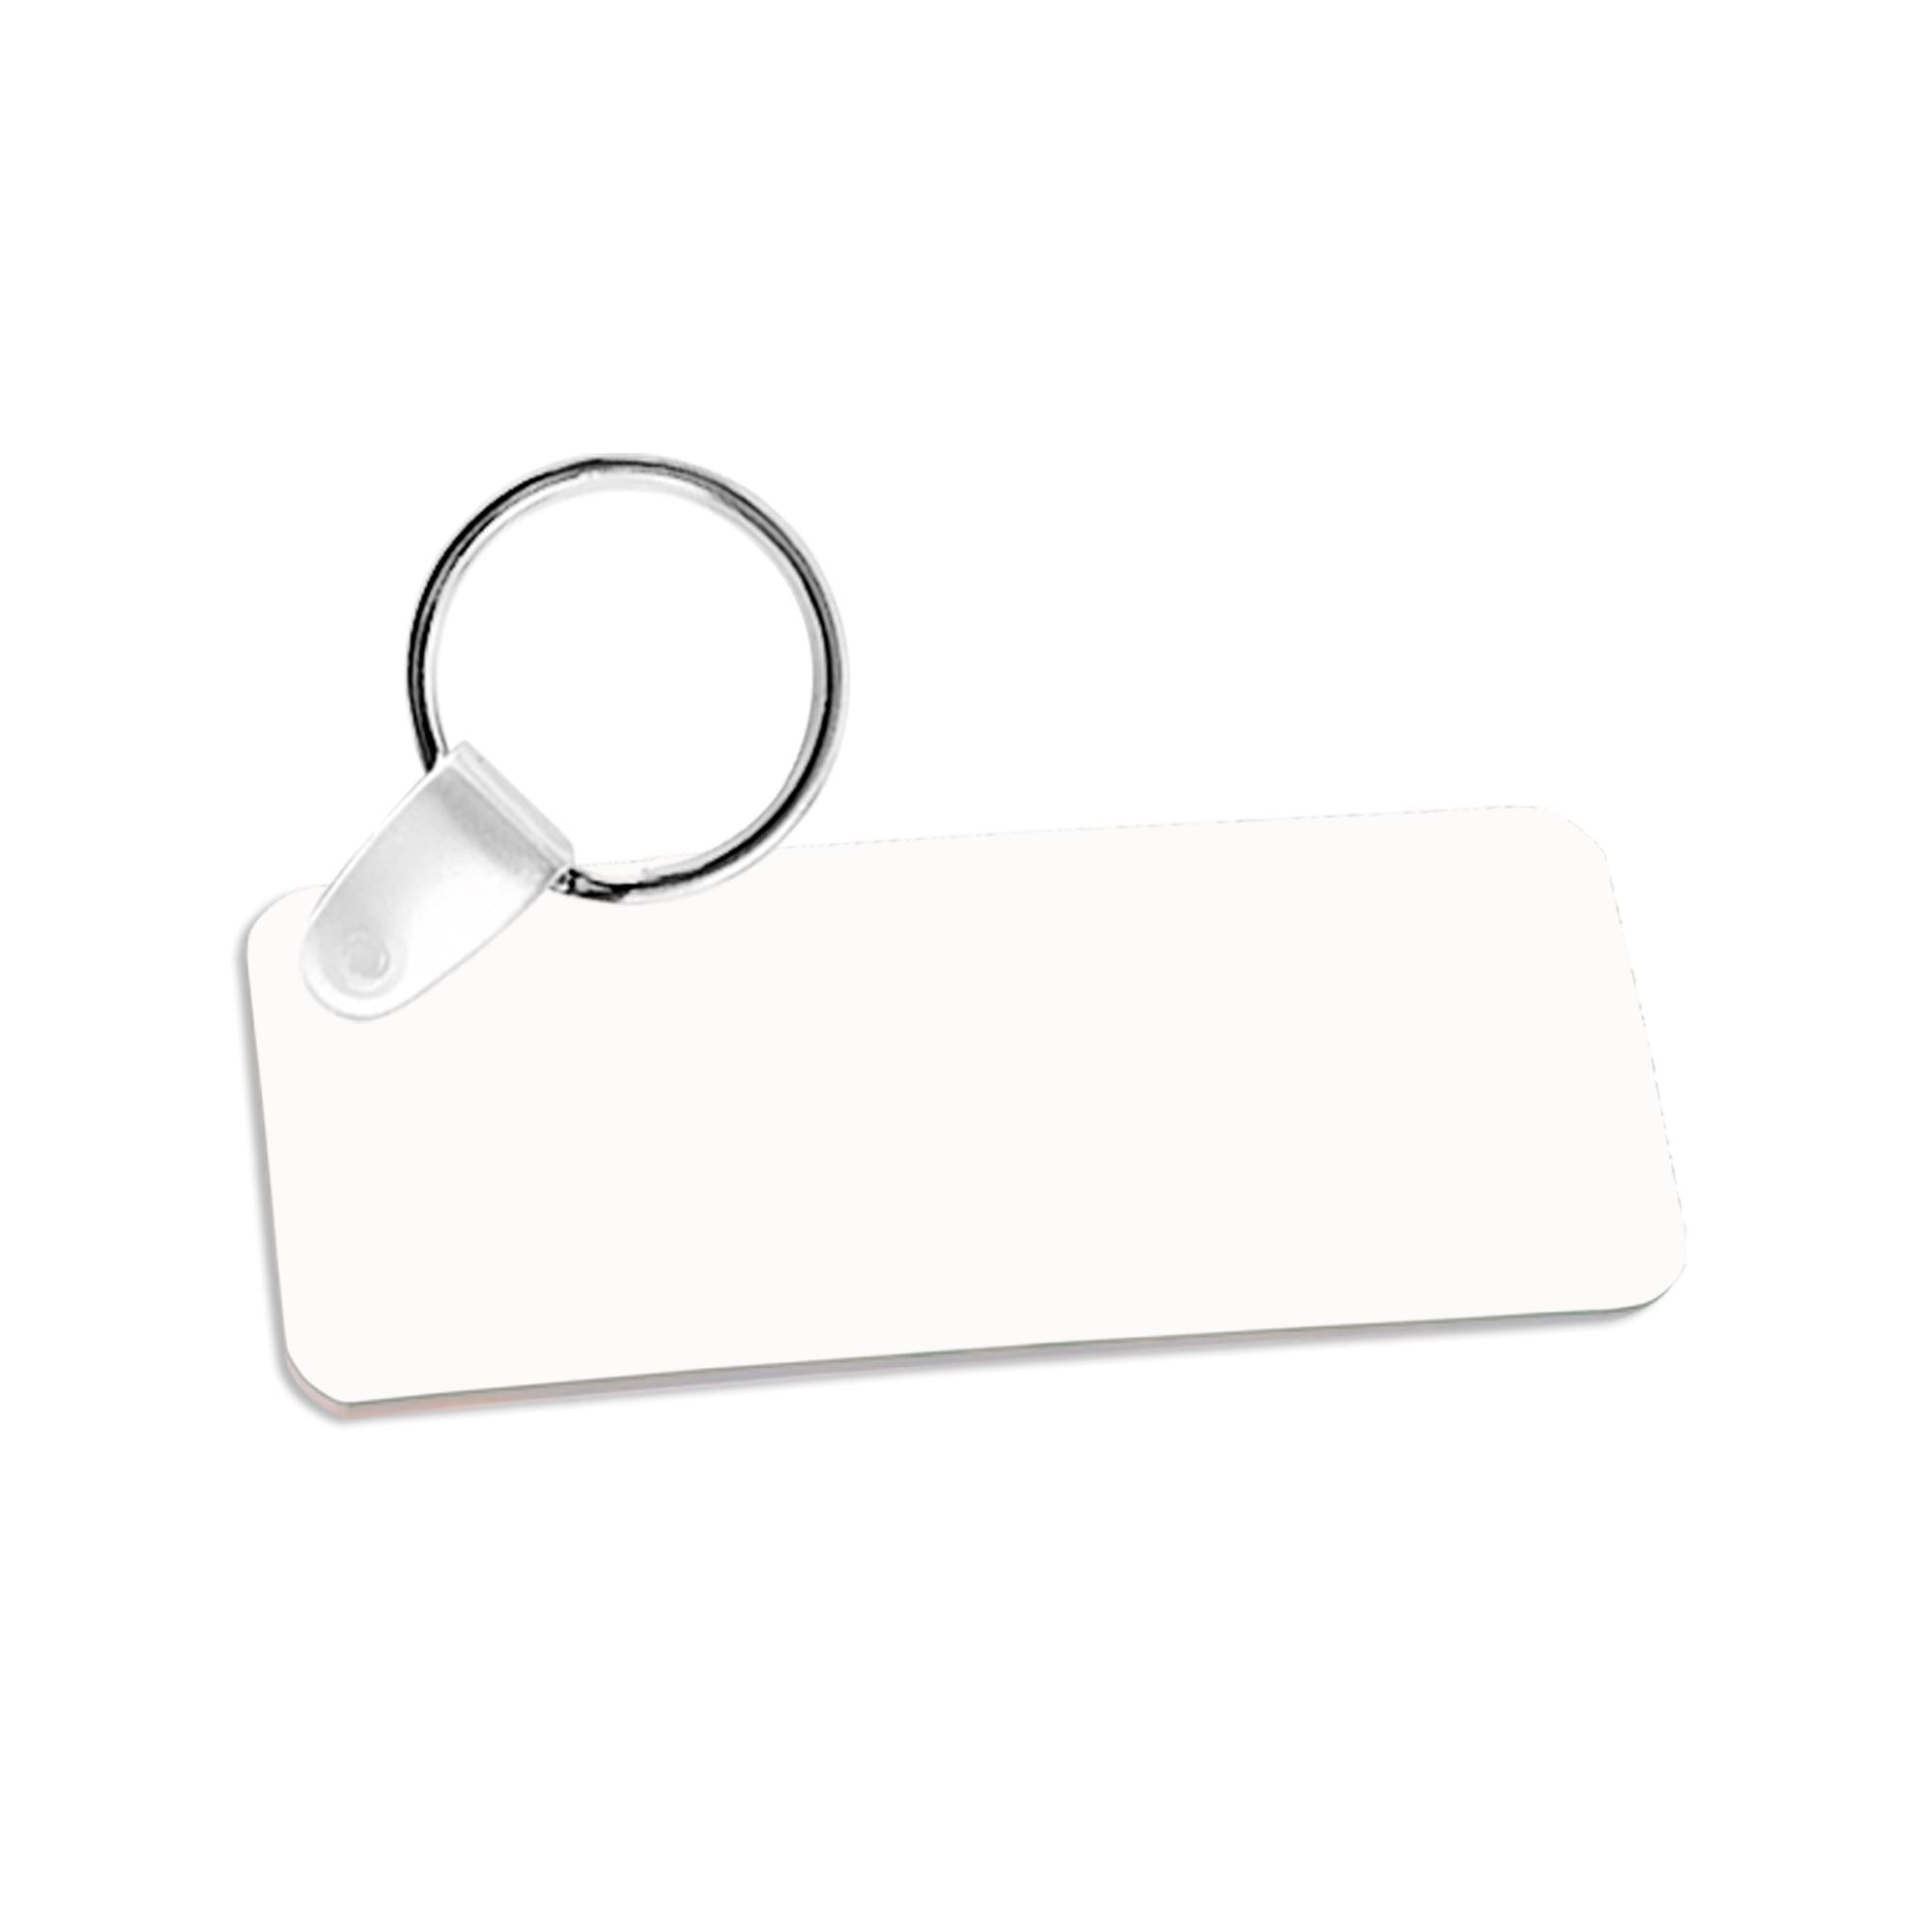 12 Packs: 4 ct. (48 total) 1.9 Sublimation Keychains by Make Market®